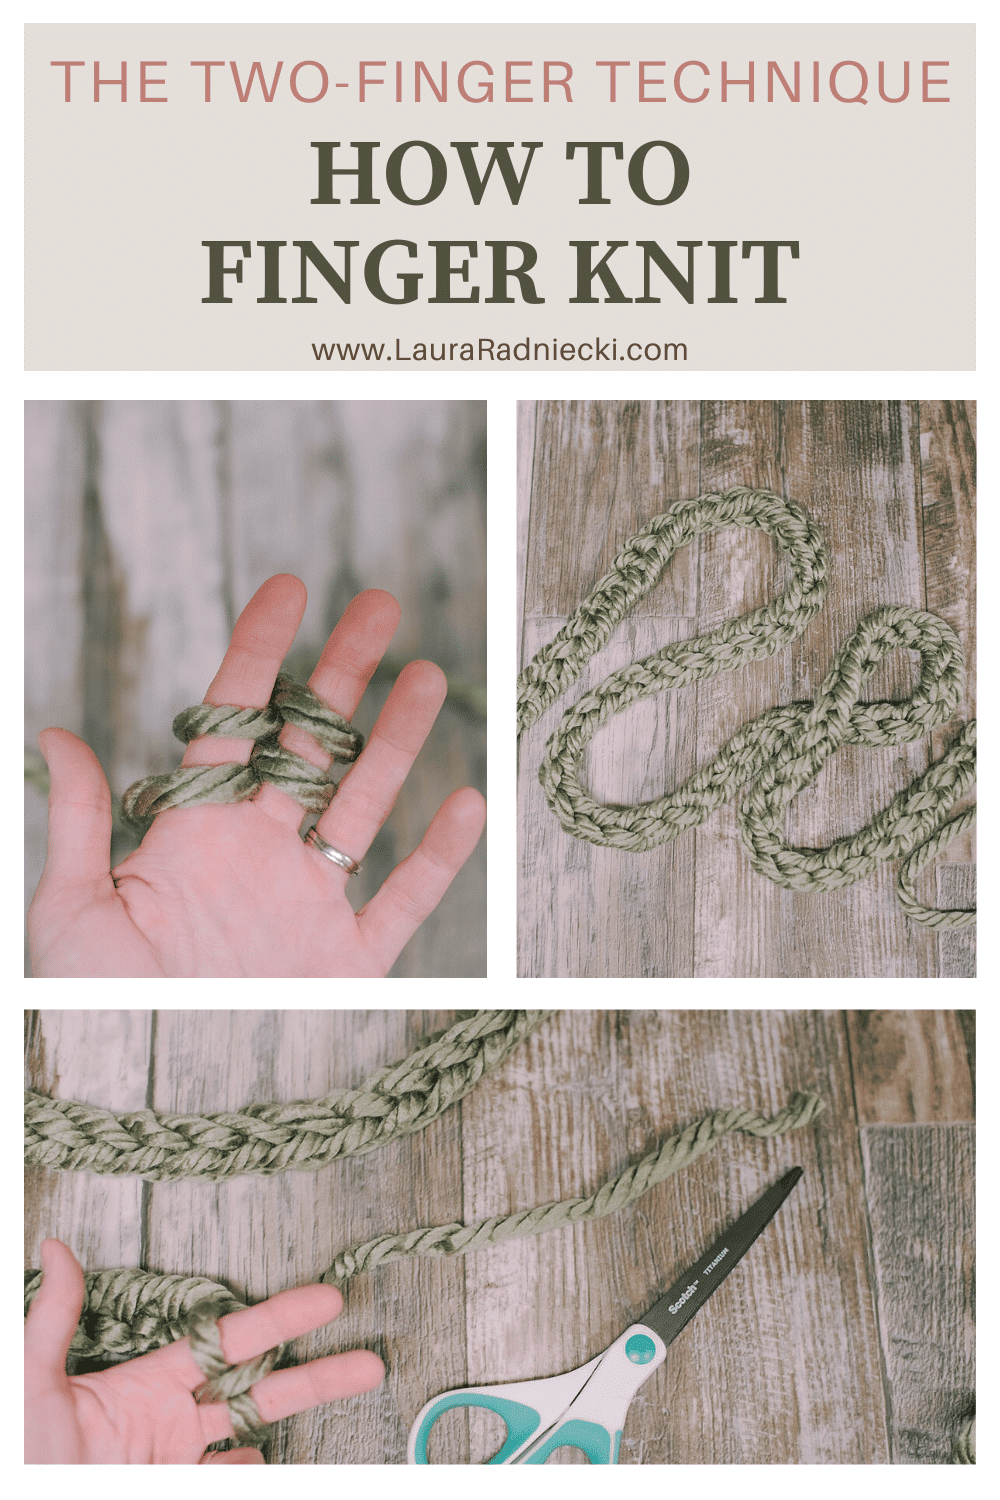 How to Finger Knit using Yarn (The Two Finger Technique)